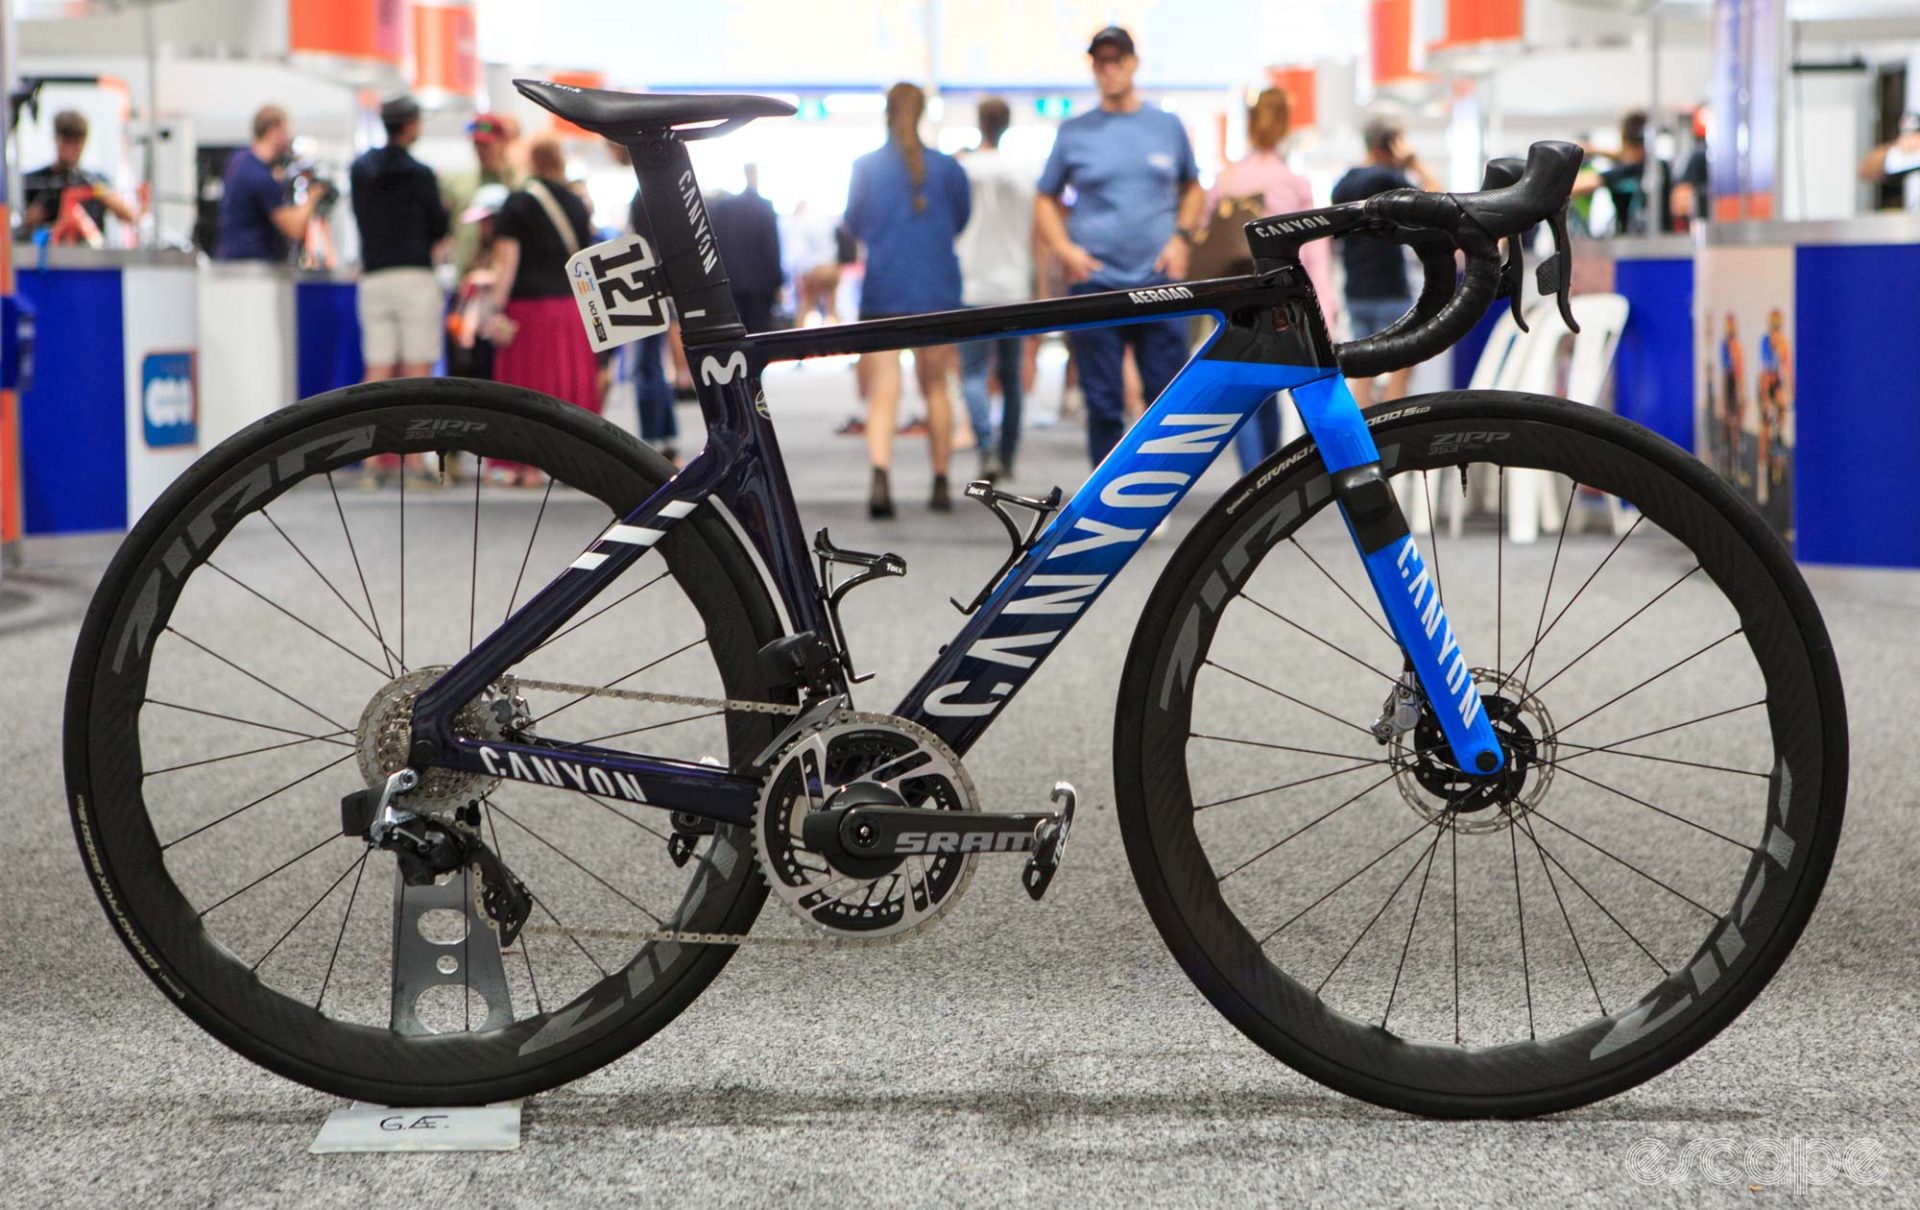 Canyon's Aeroad CFR in Movistar colors.